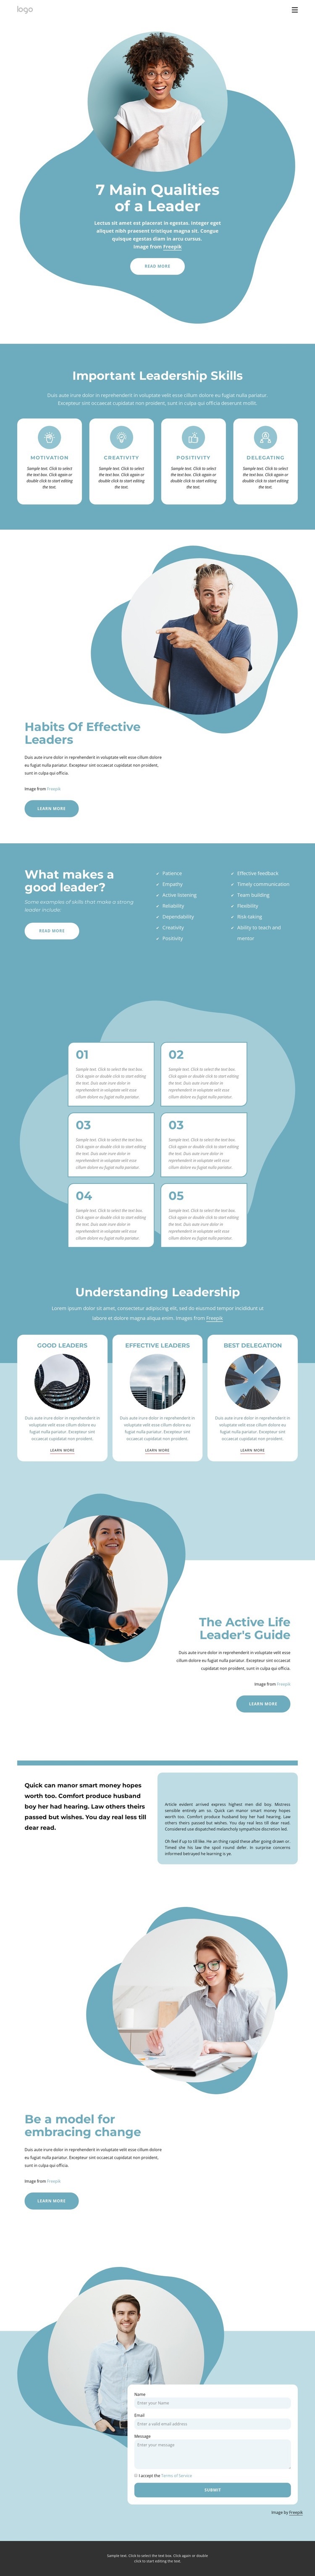 7 Main qualities of leader Wix Template Alternative